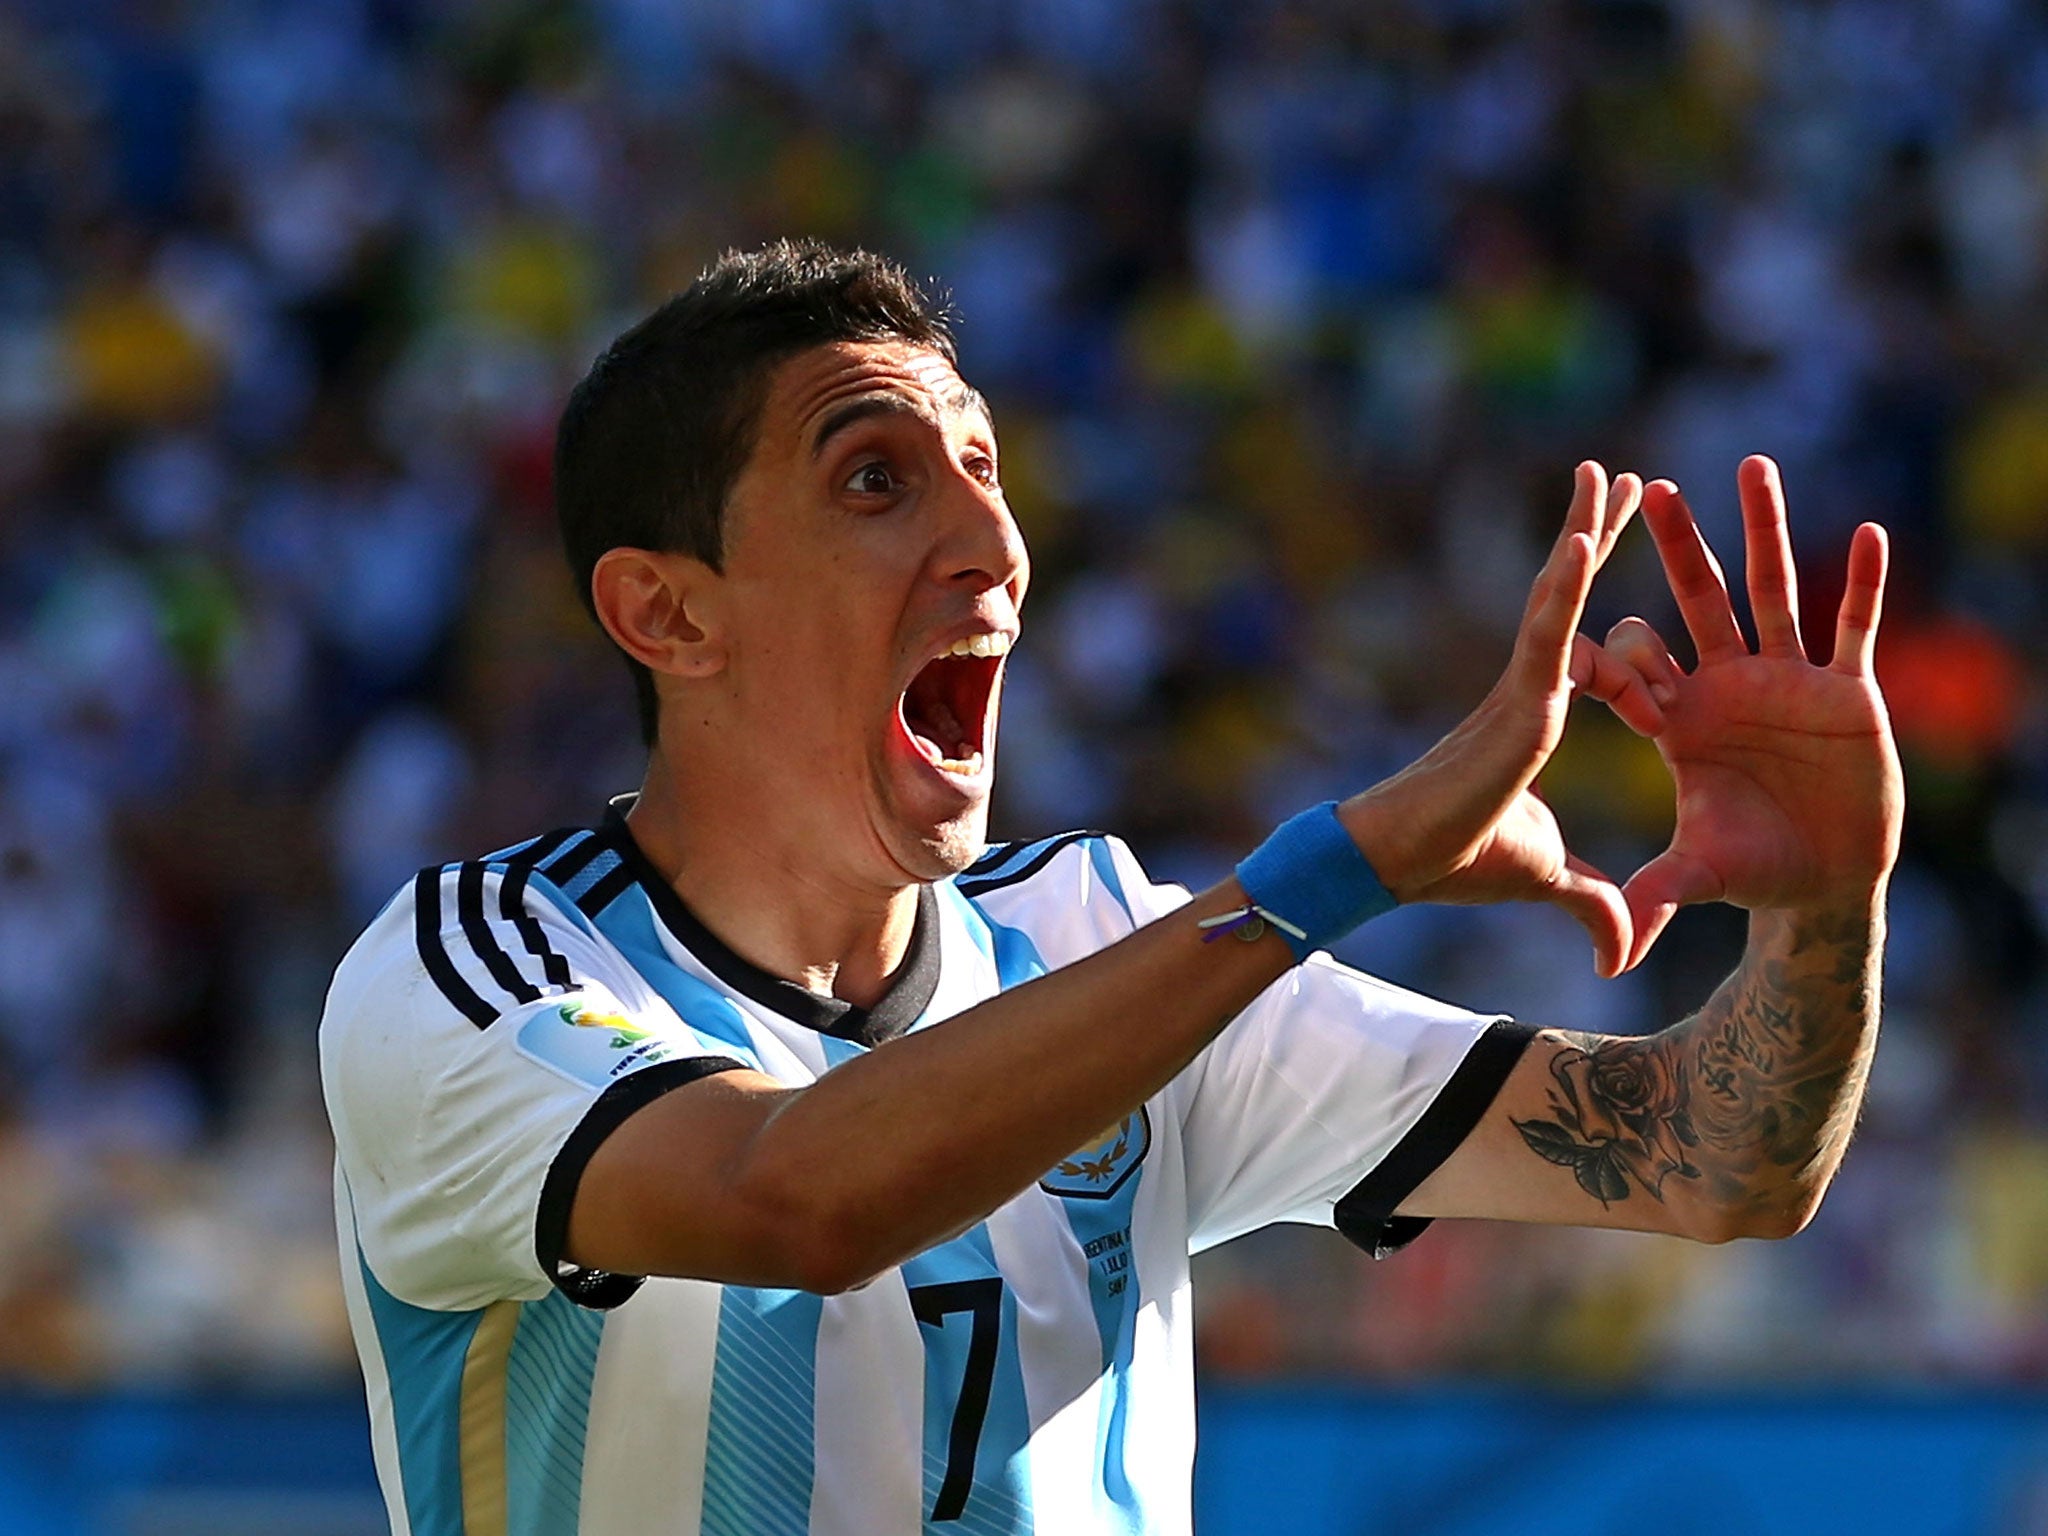 Angel Di Maria is set to snub Manchester United, according to reports.